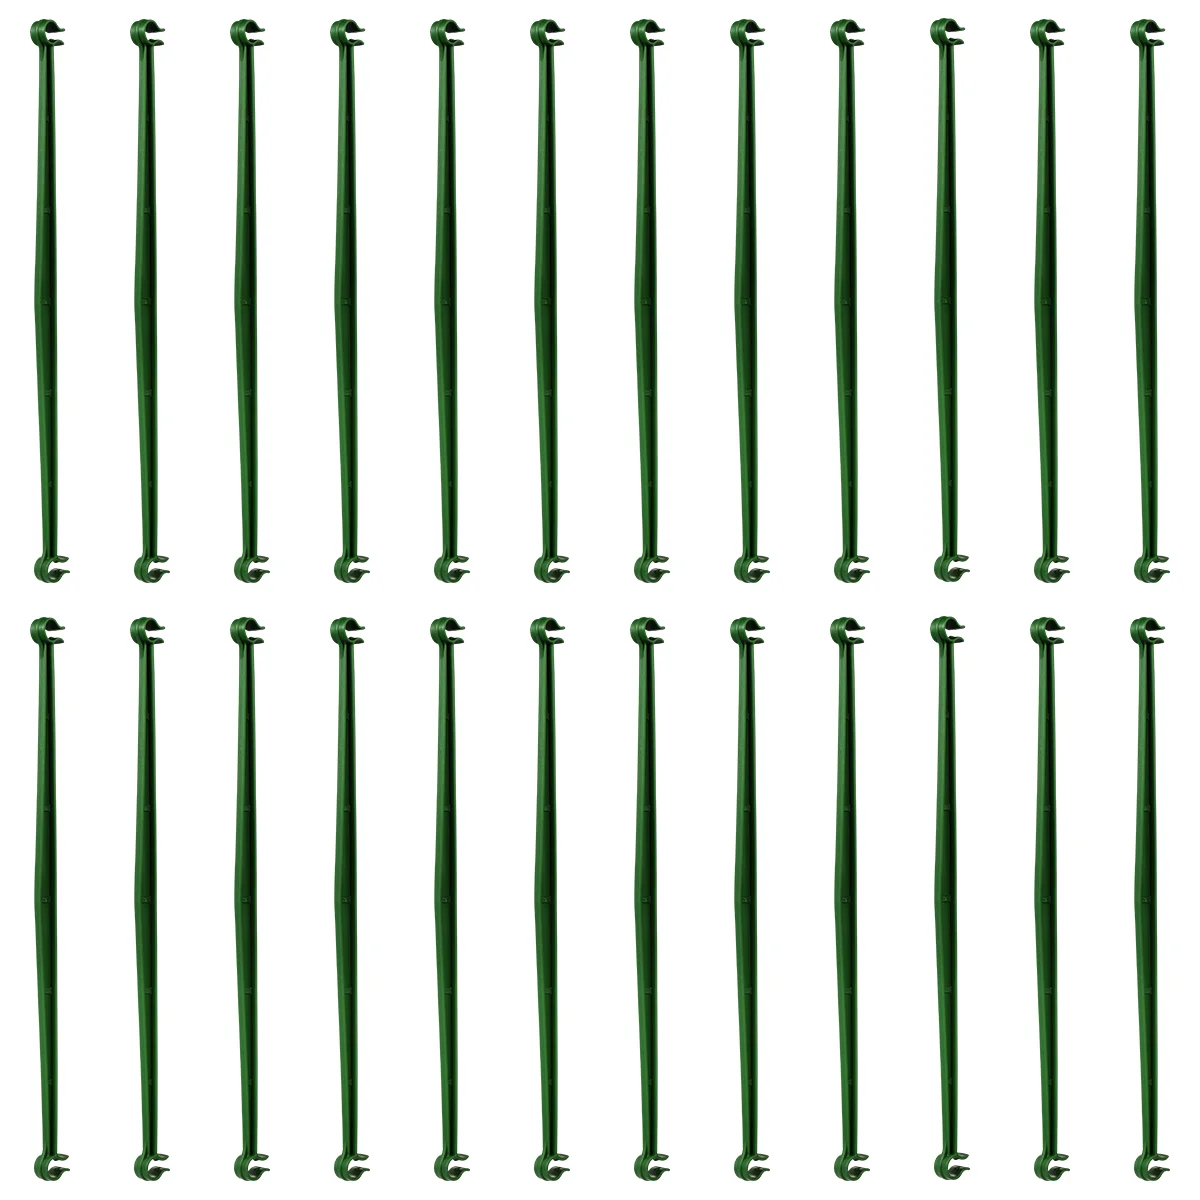 

24pcs Expandable Durable Tomato Bracket Connectors Plant Stakes Stake Arms for Planting Gardening Climbing